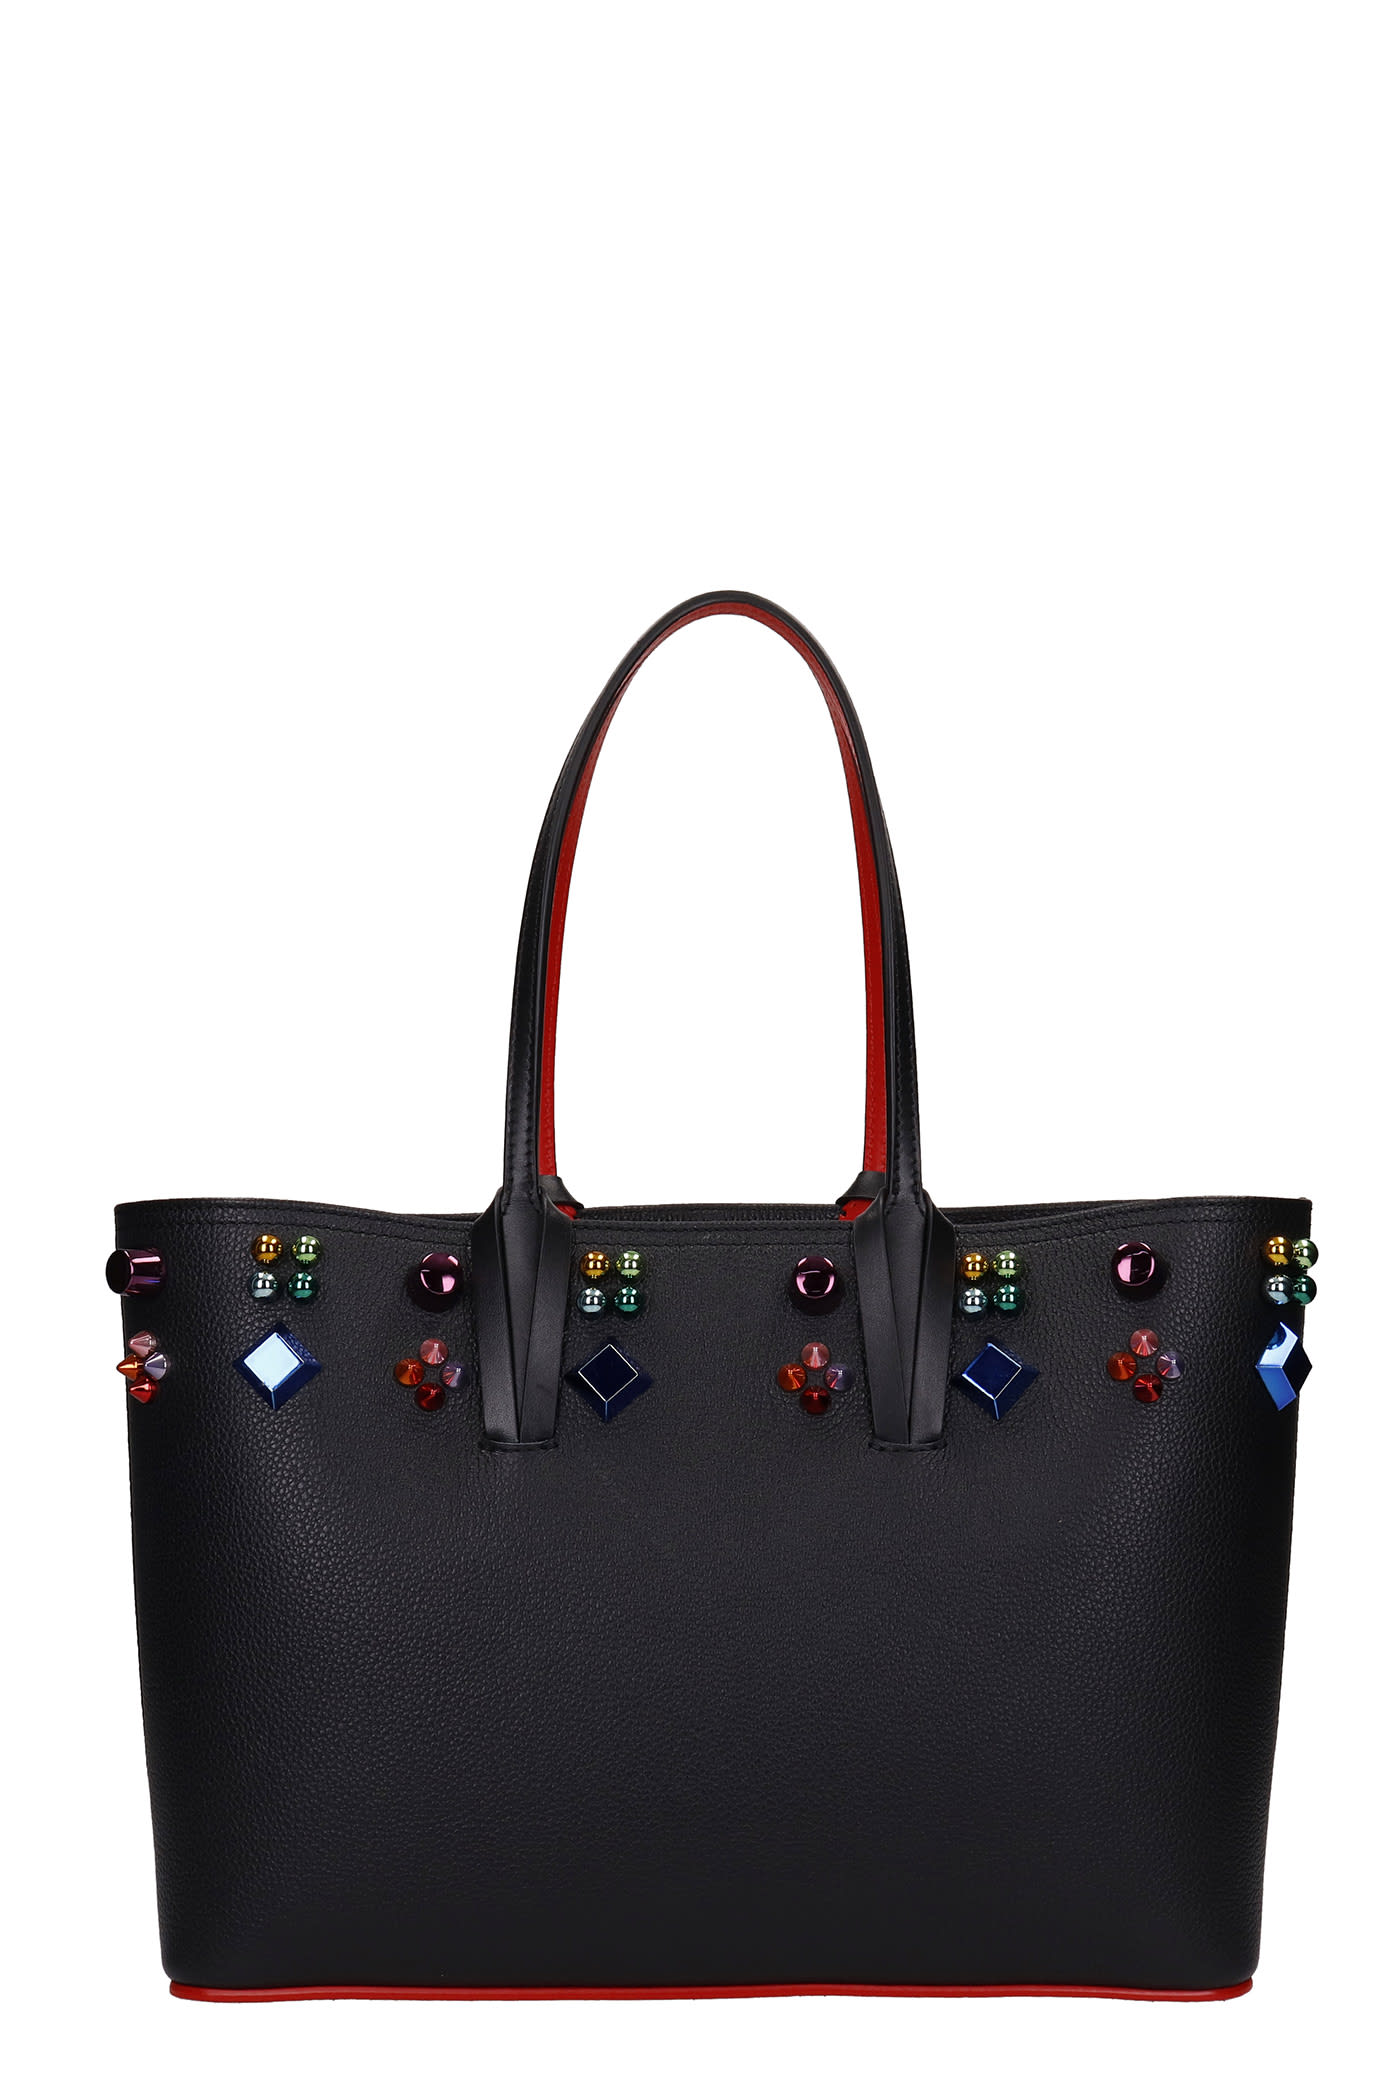 Christian Louboutin Cabata Tote In Black Leather